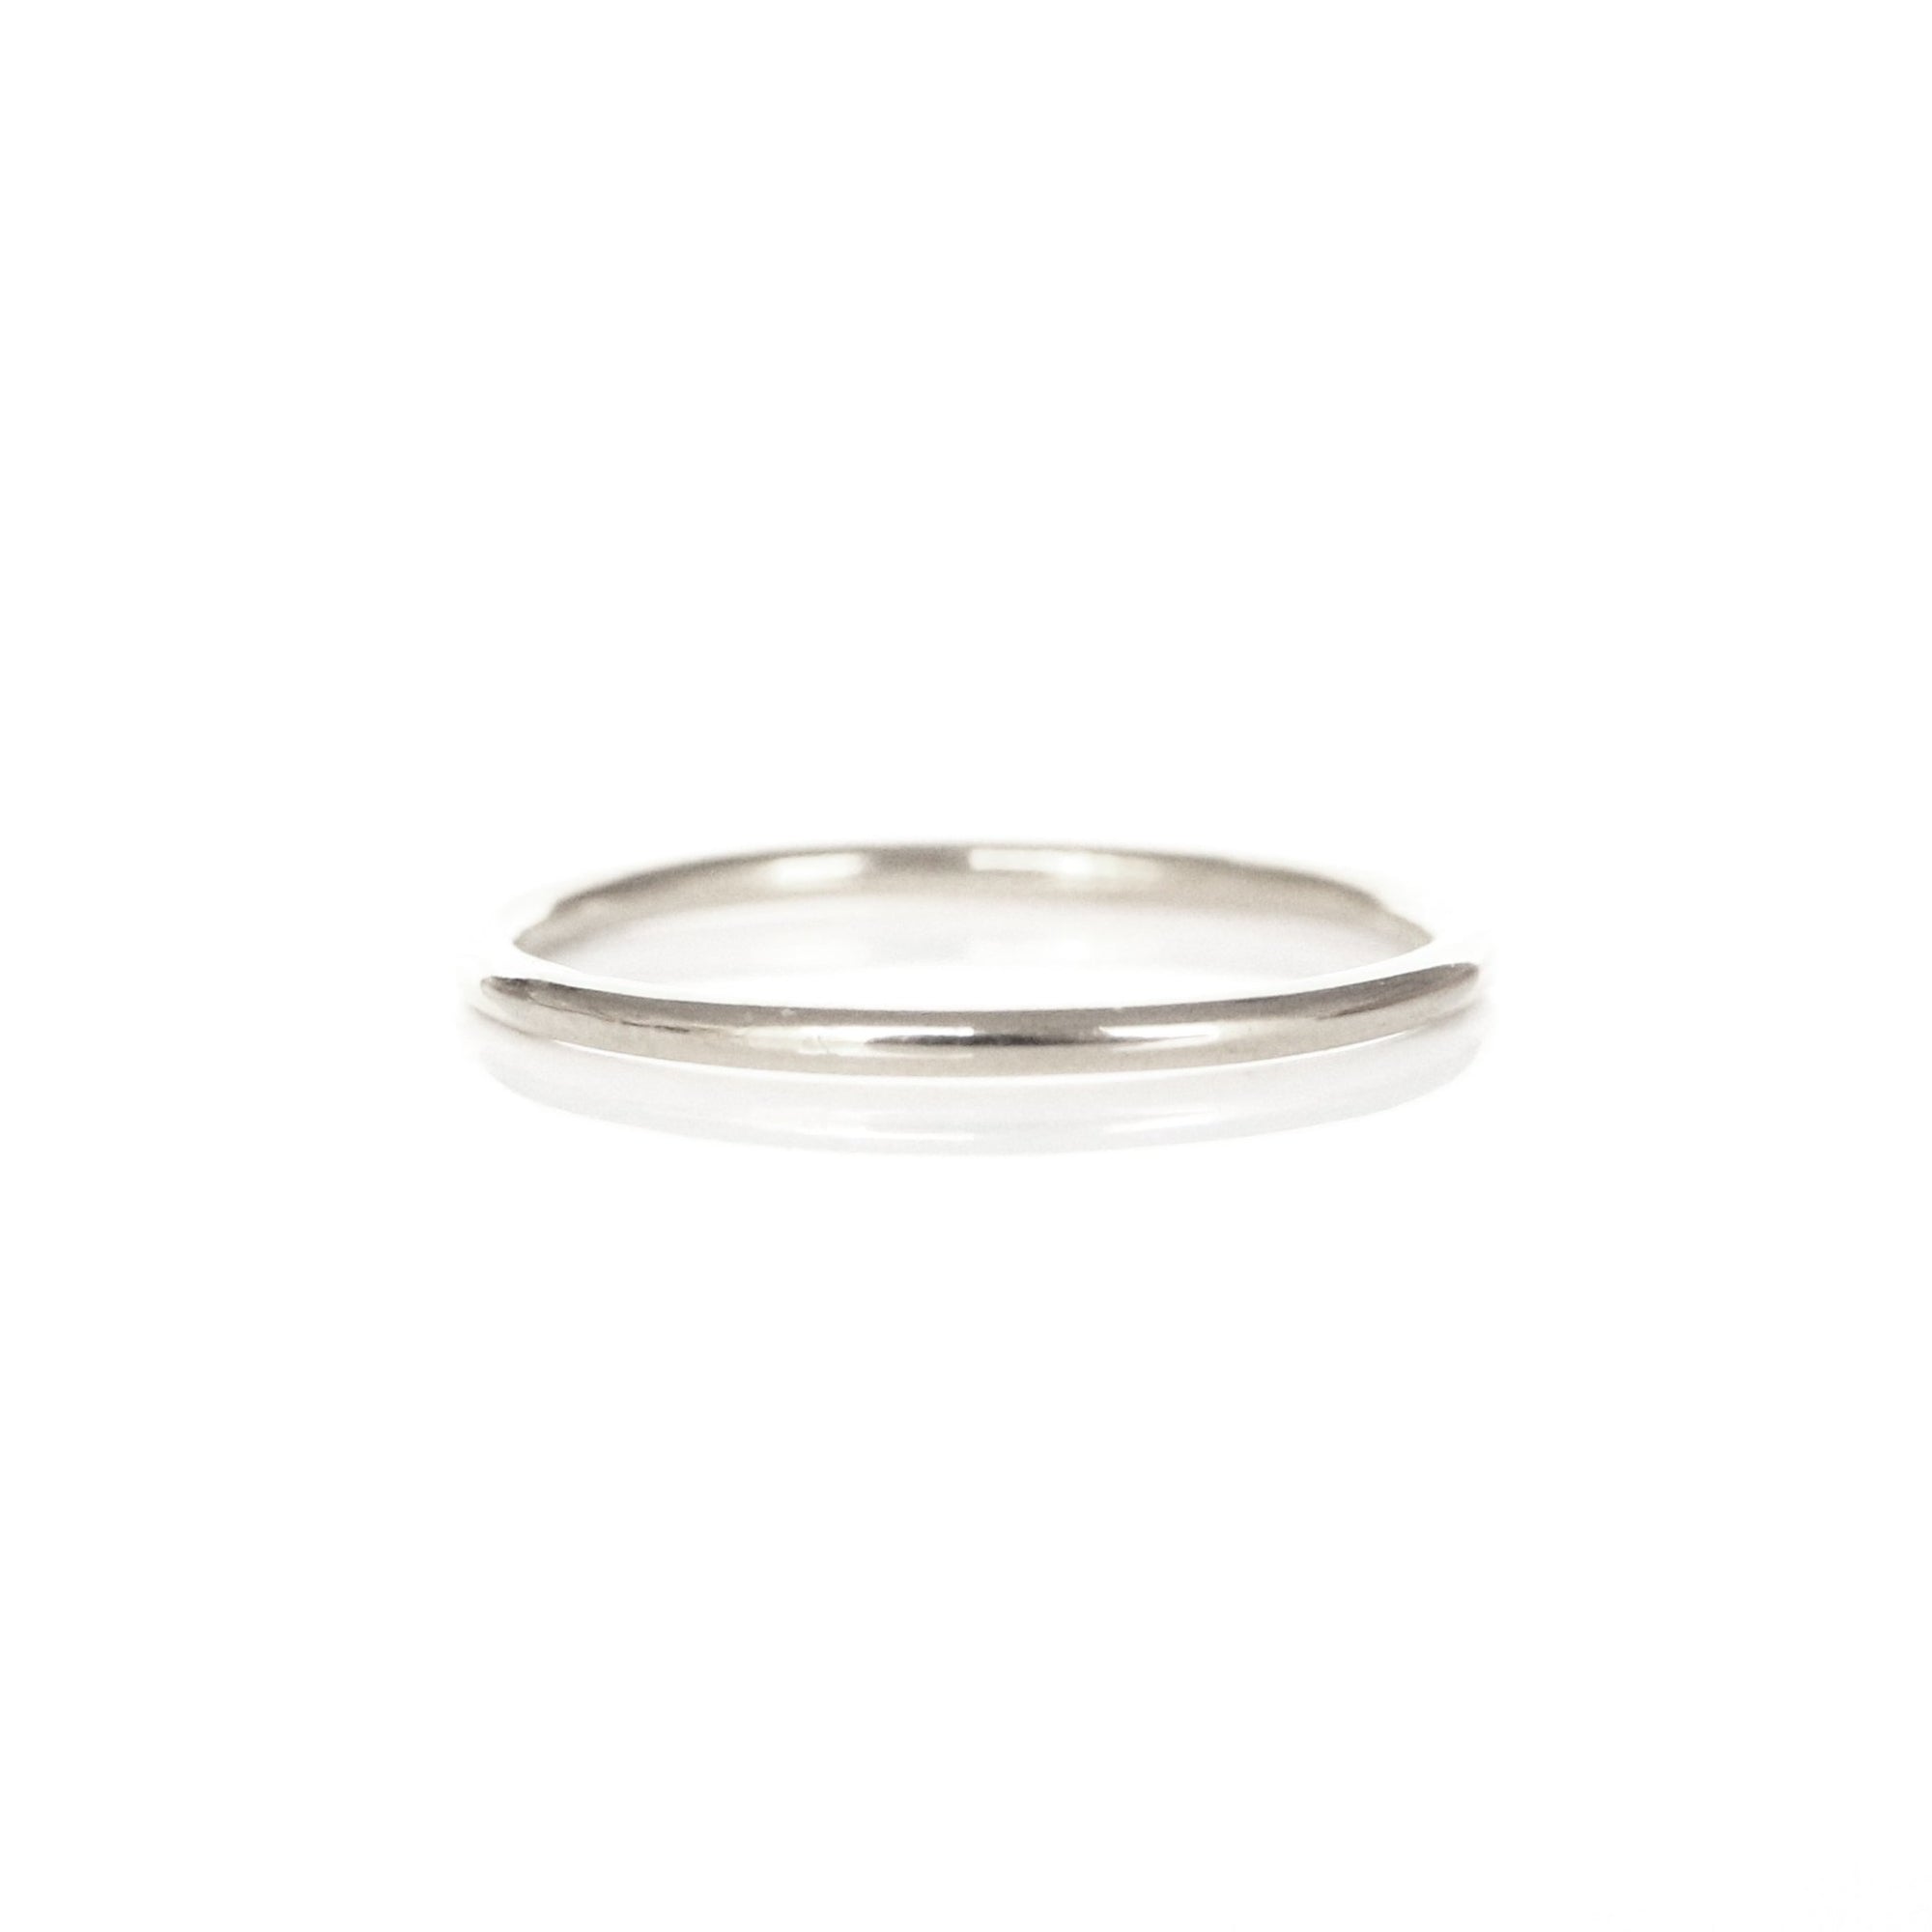 POISE THIN BAND RING - SILVER - SO PRETTY CARA COTTER